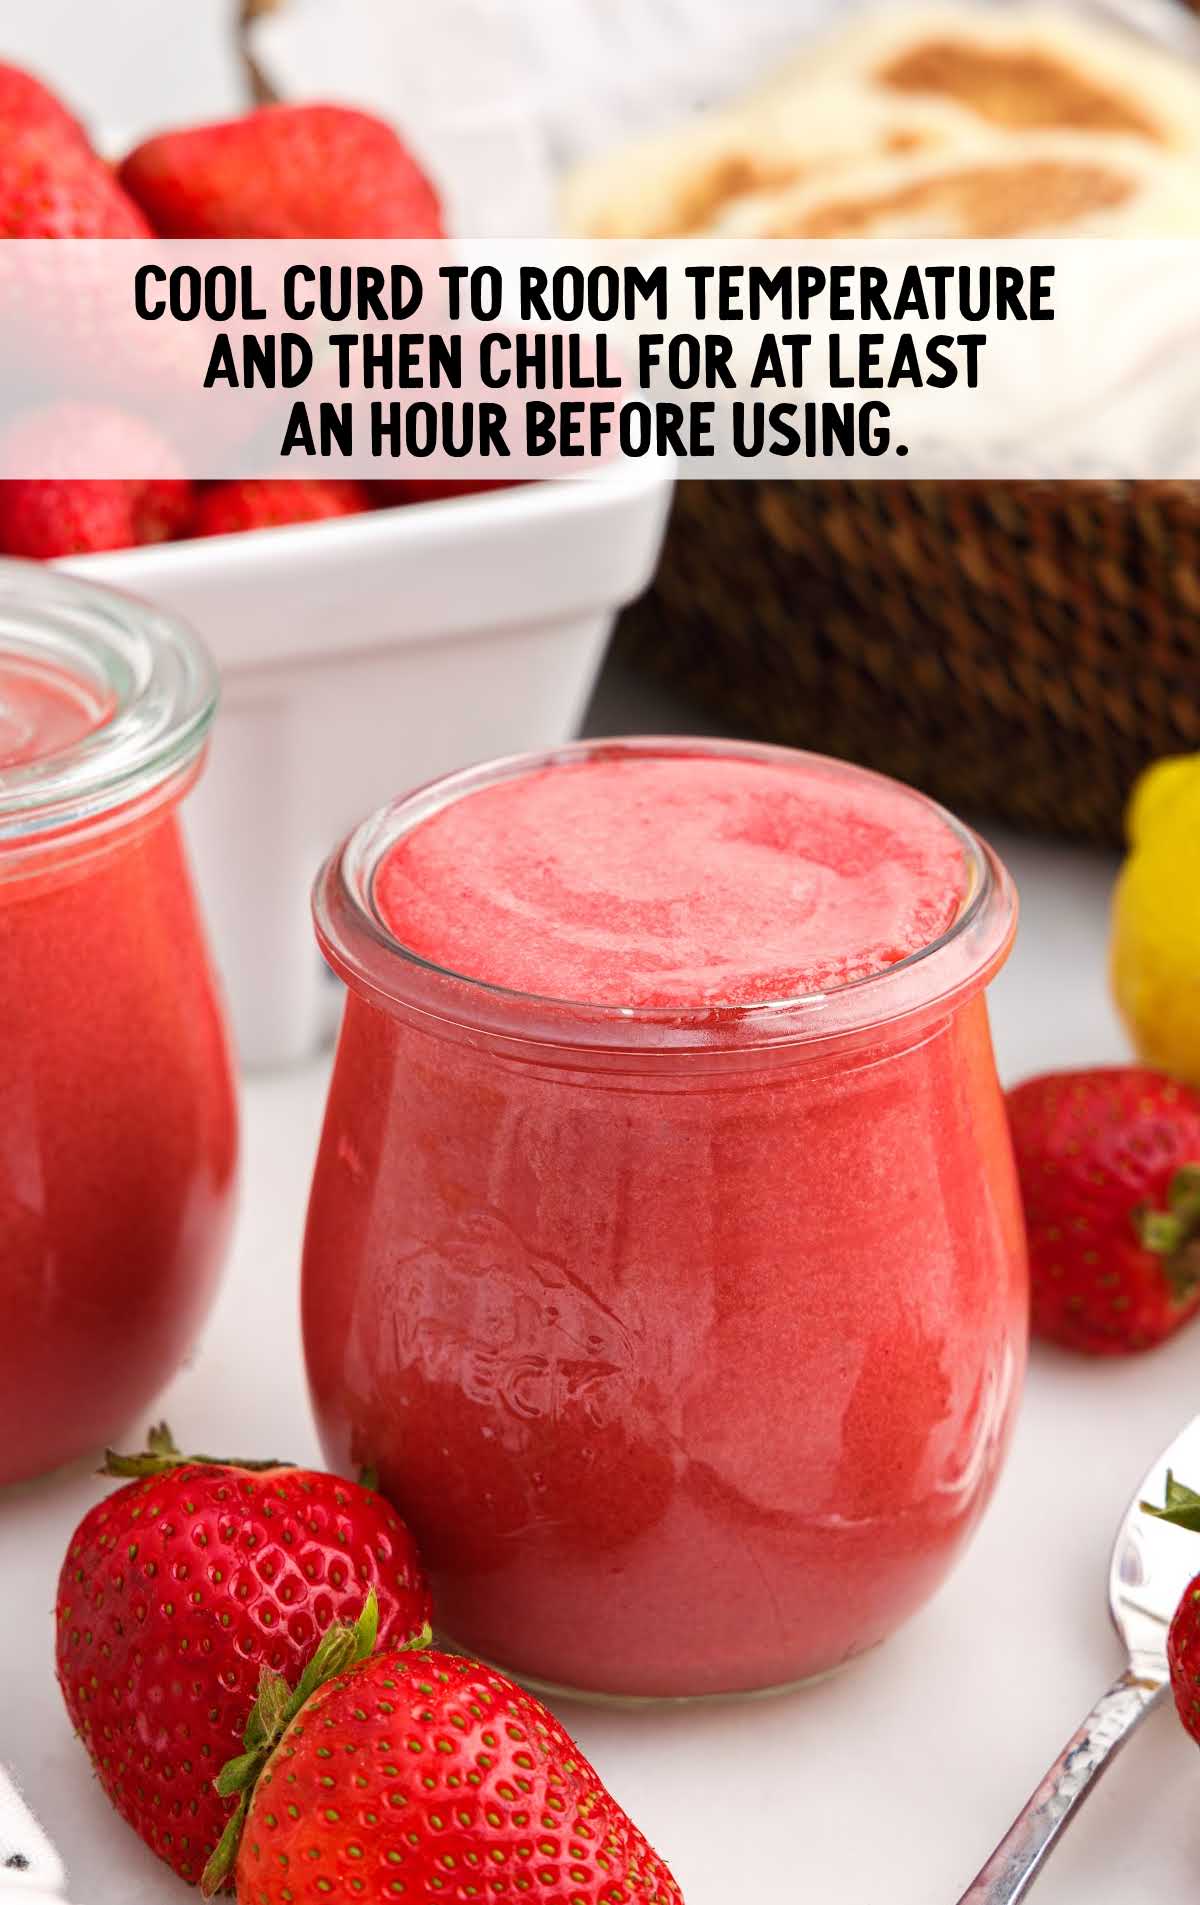 chill the Strawberry Curd for an hour